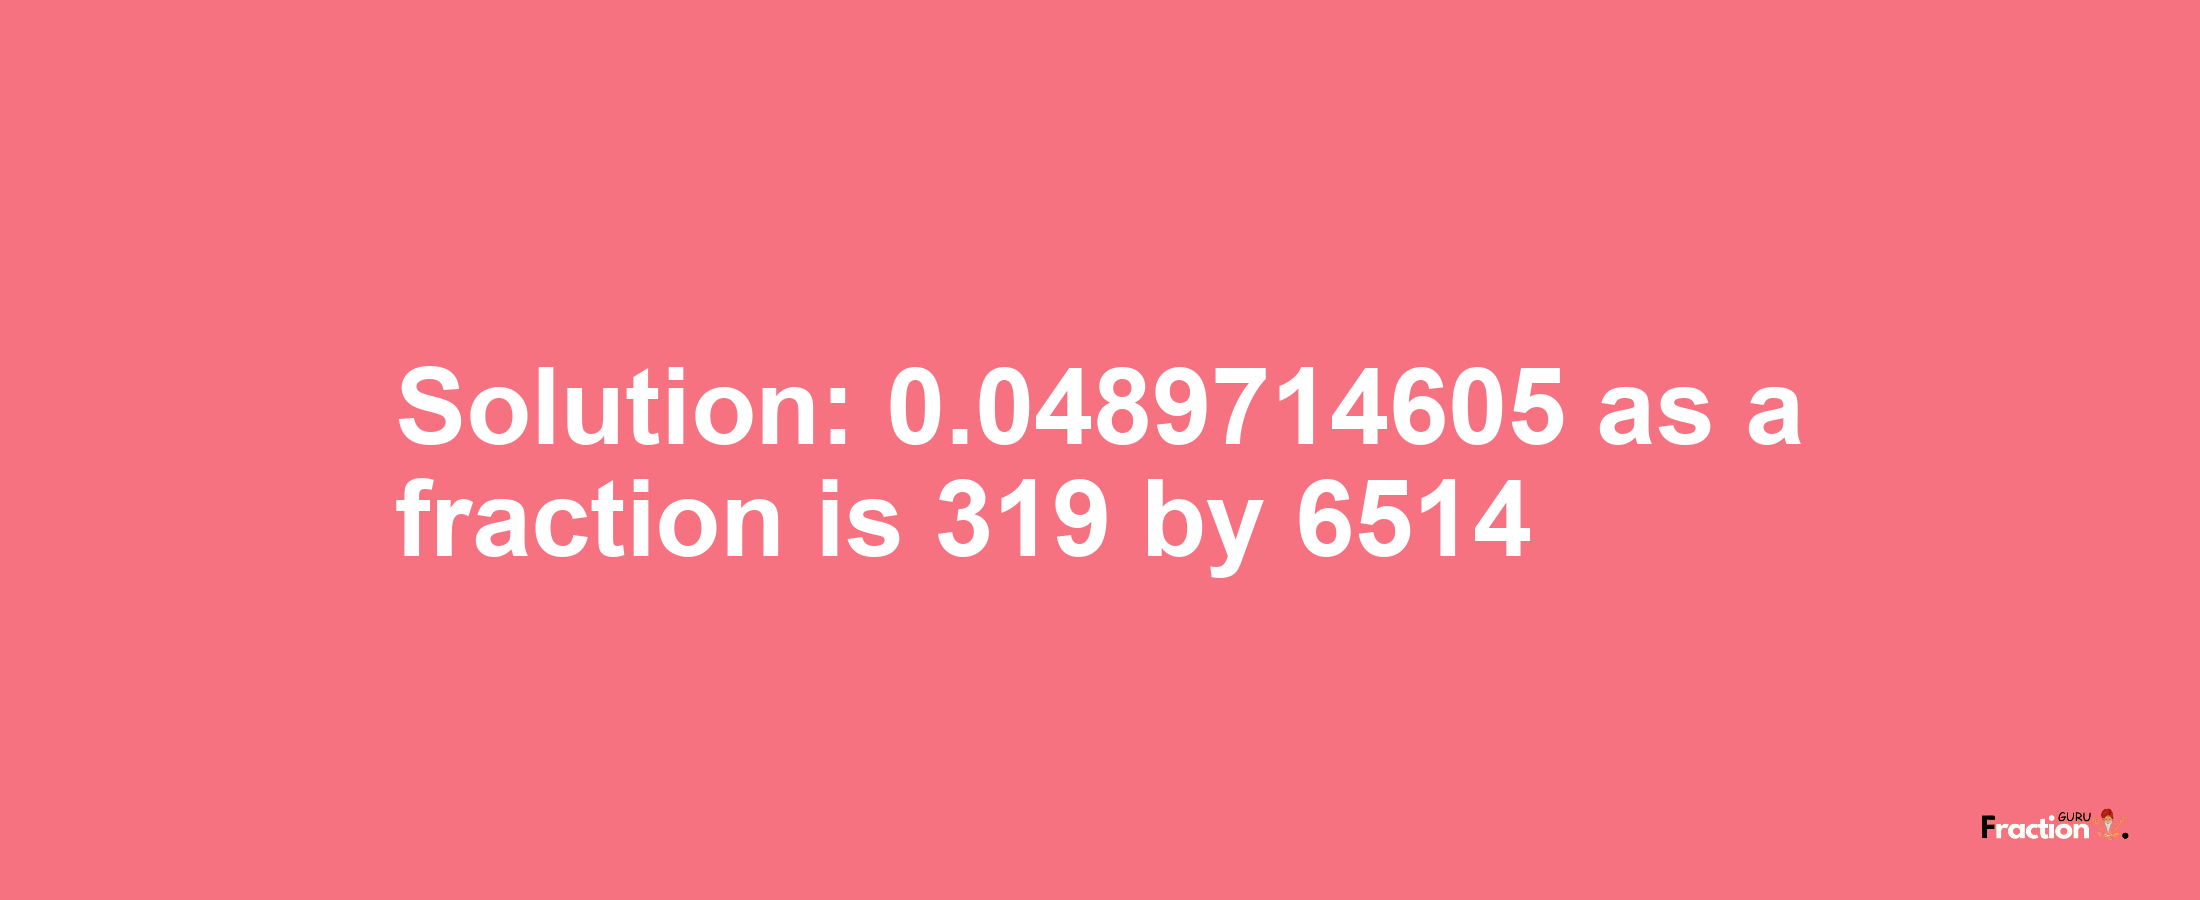 Solution:0.0489714605 as a fraction is 319/6514